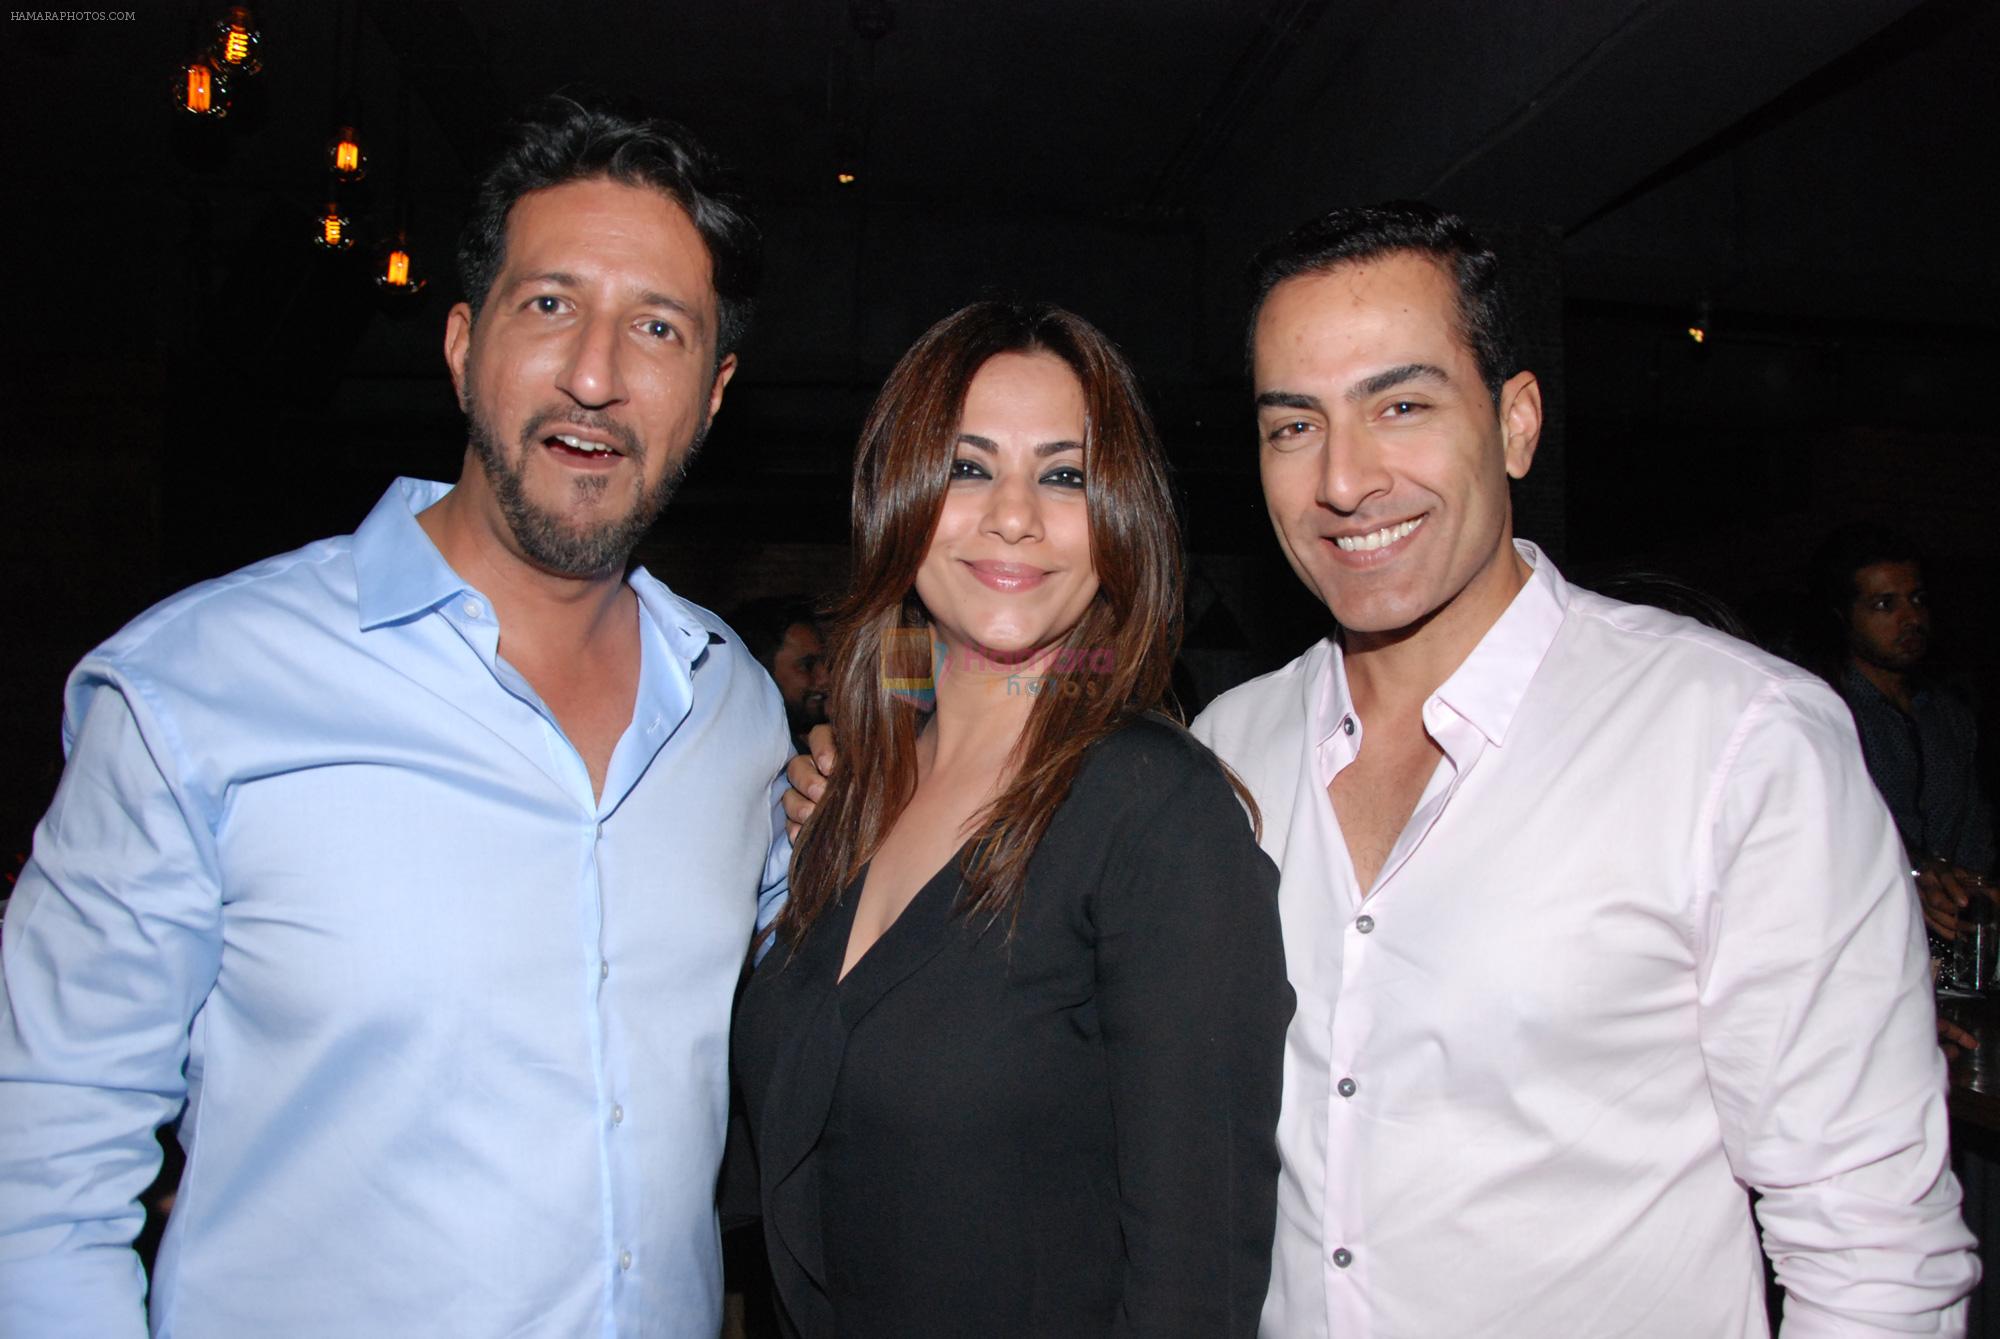 Sulaiman Merchant and wife with sudhanshu pandey at Harry's Bar & cafe